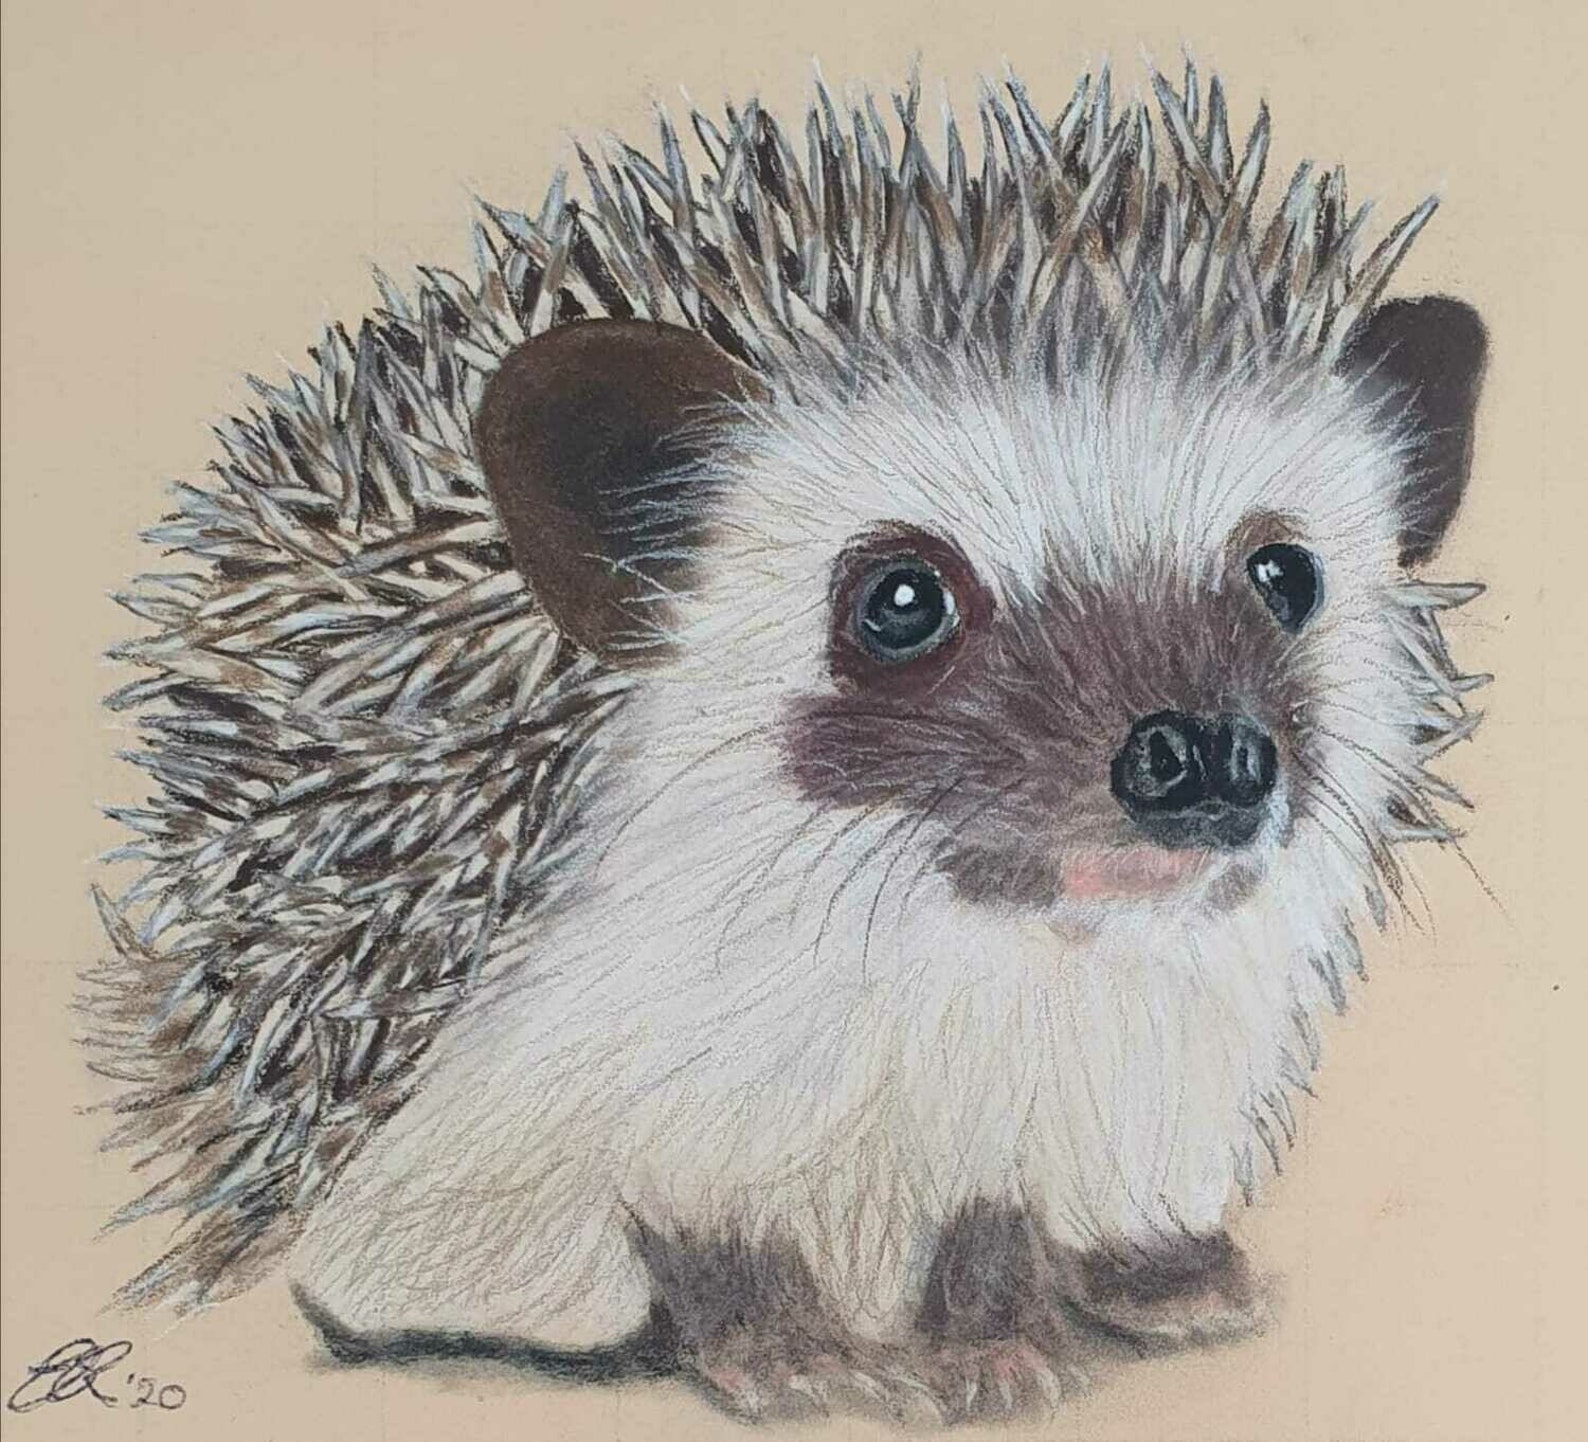 Cute Hedgehog Original Signed Pastel Painting A4 size | Etsy